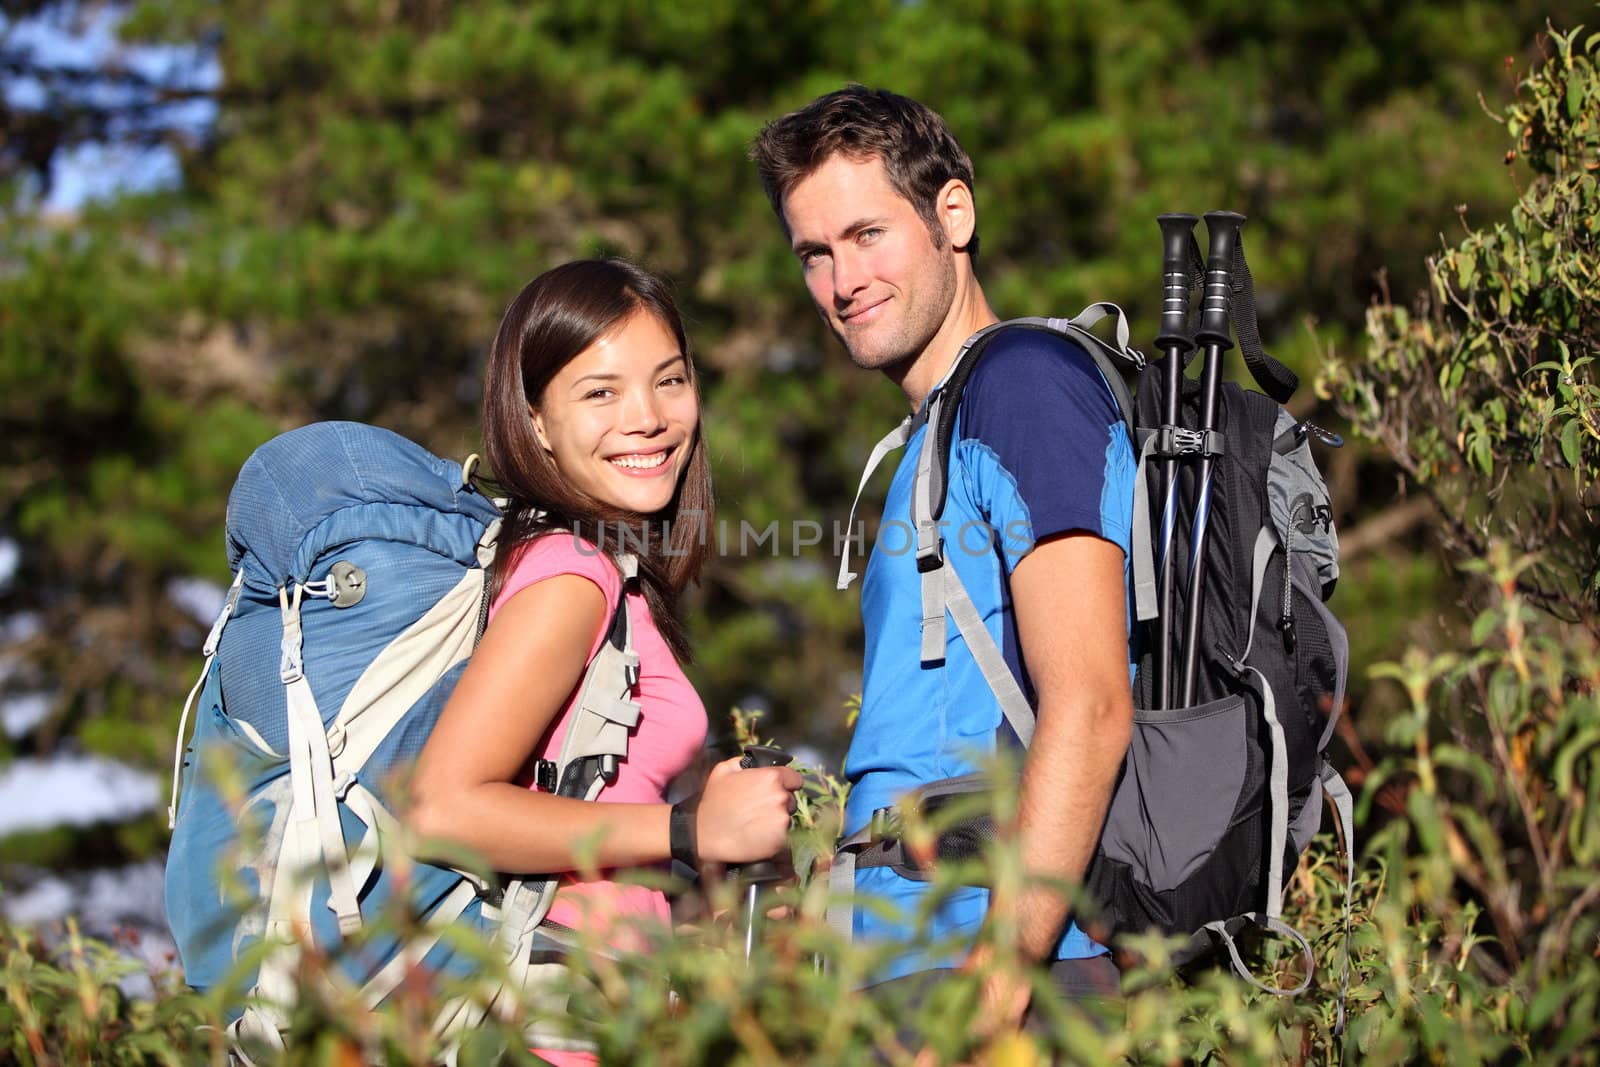 Happy hiking couple smiling during hike in forest on Tenerife, Canary Islands, Spain. Mixed race couple.